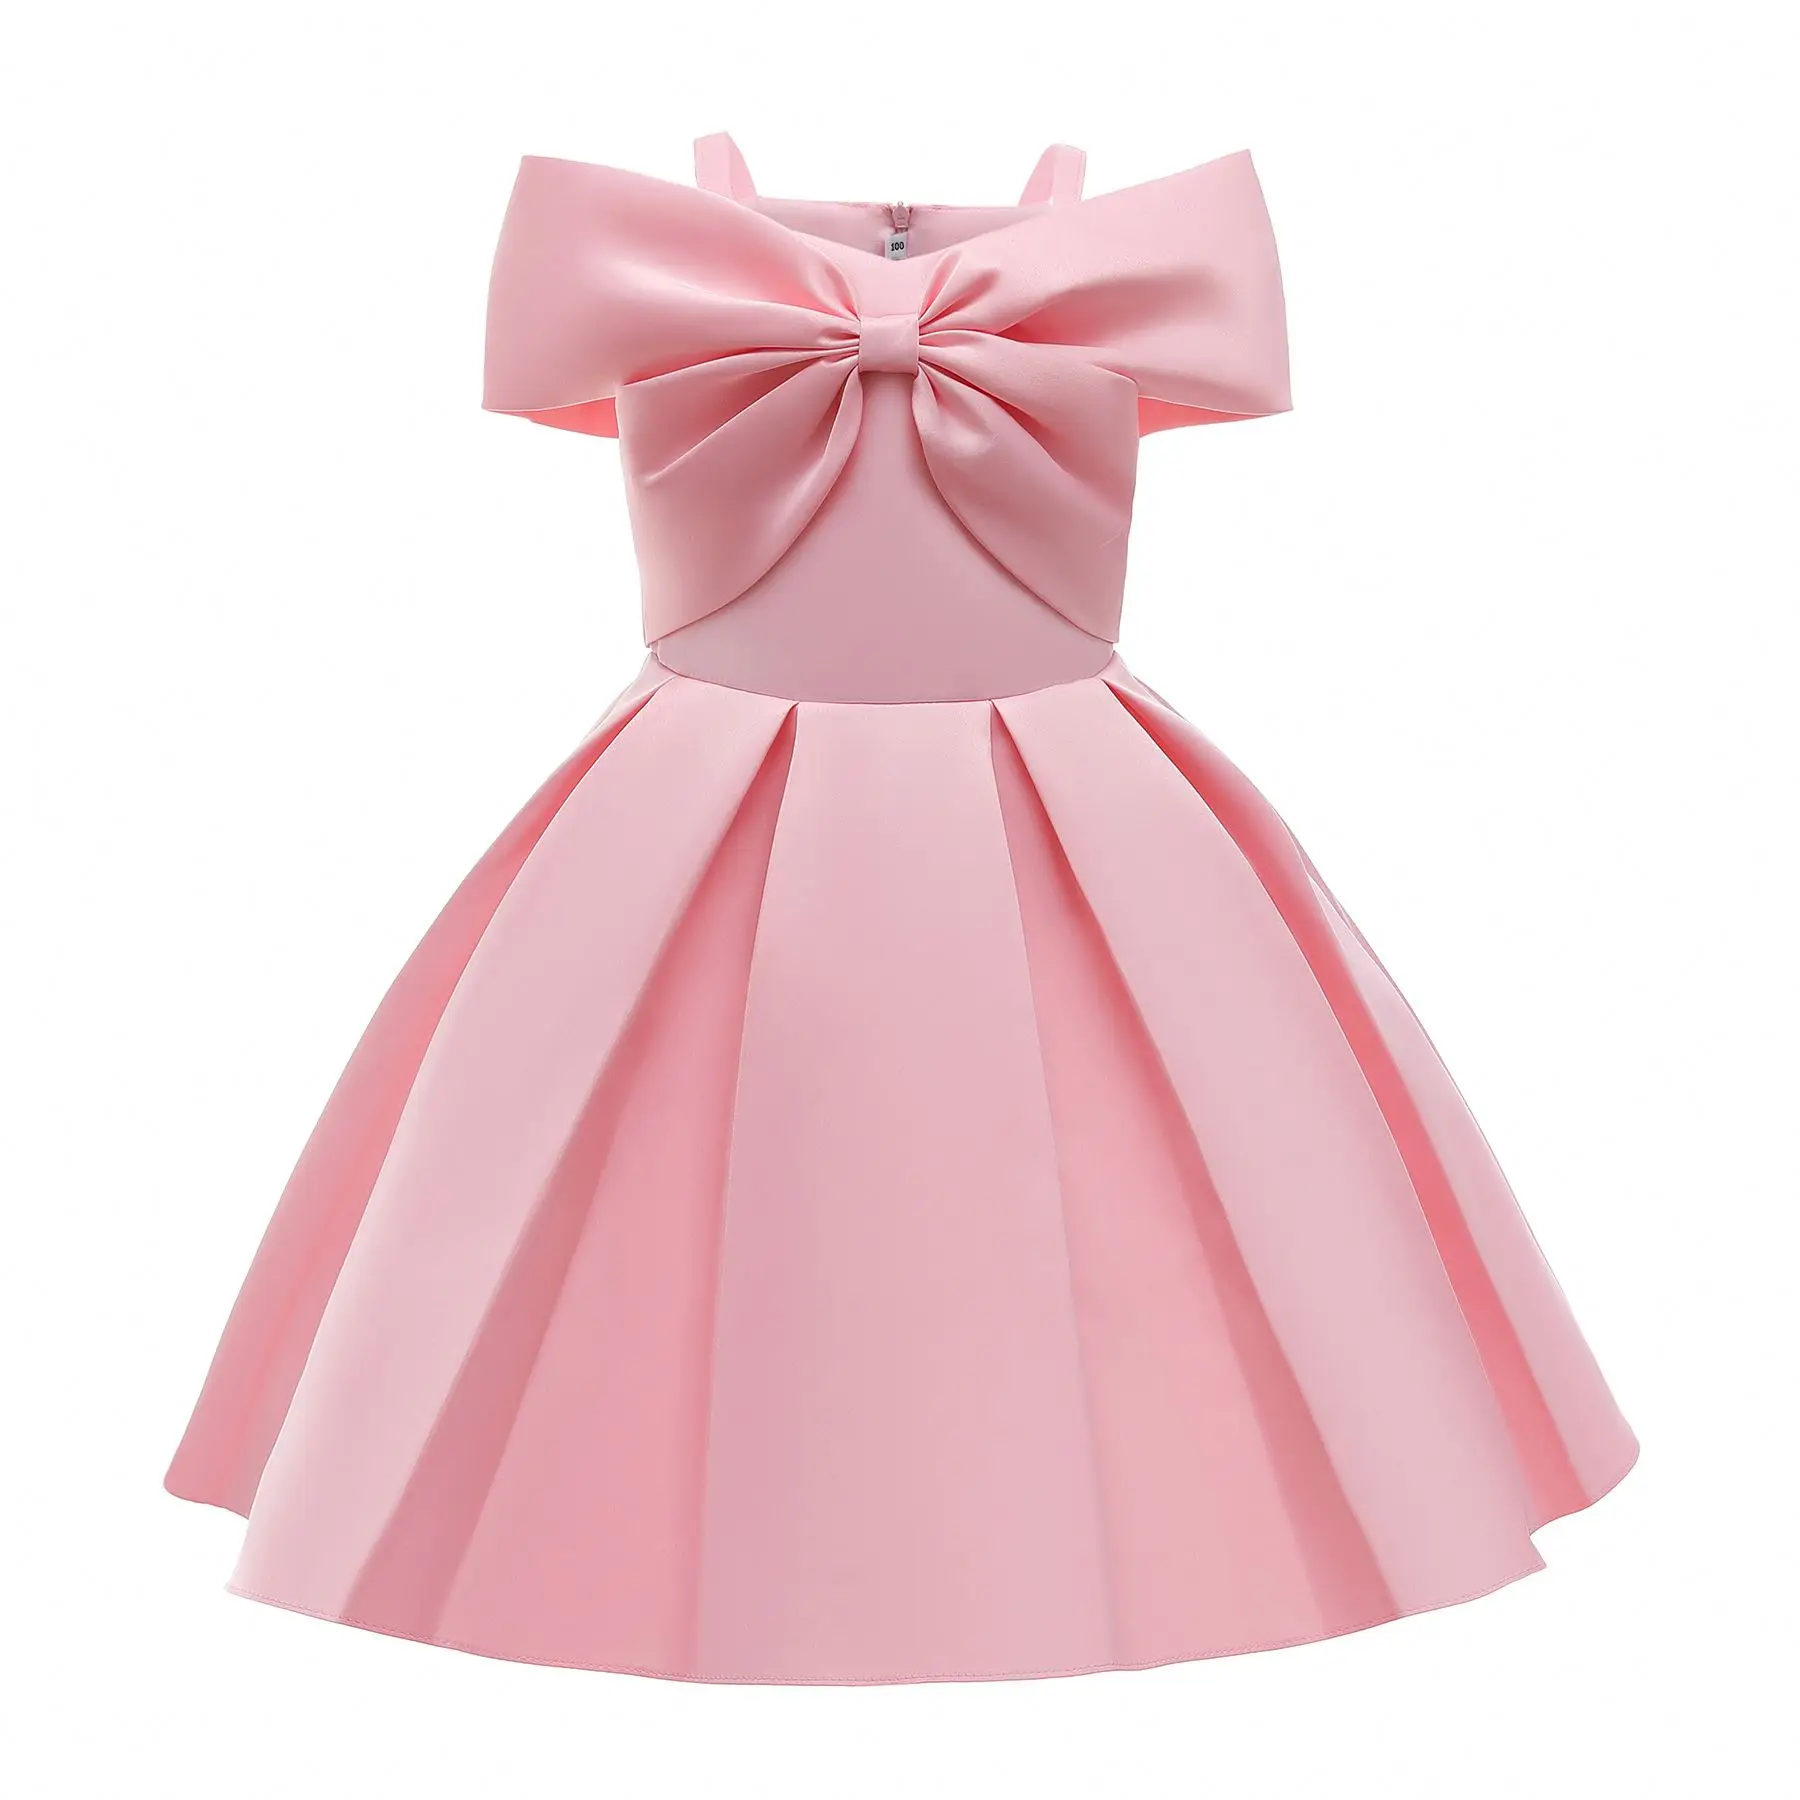 

Hot Selling Kids Princess Dress Pleated Off Shoulder Solid Color Little Girl Clothing Princess Dresses Tutu Ball Gown, White, pink, red, champagne, fuchsia